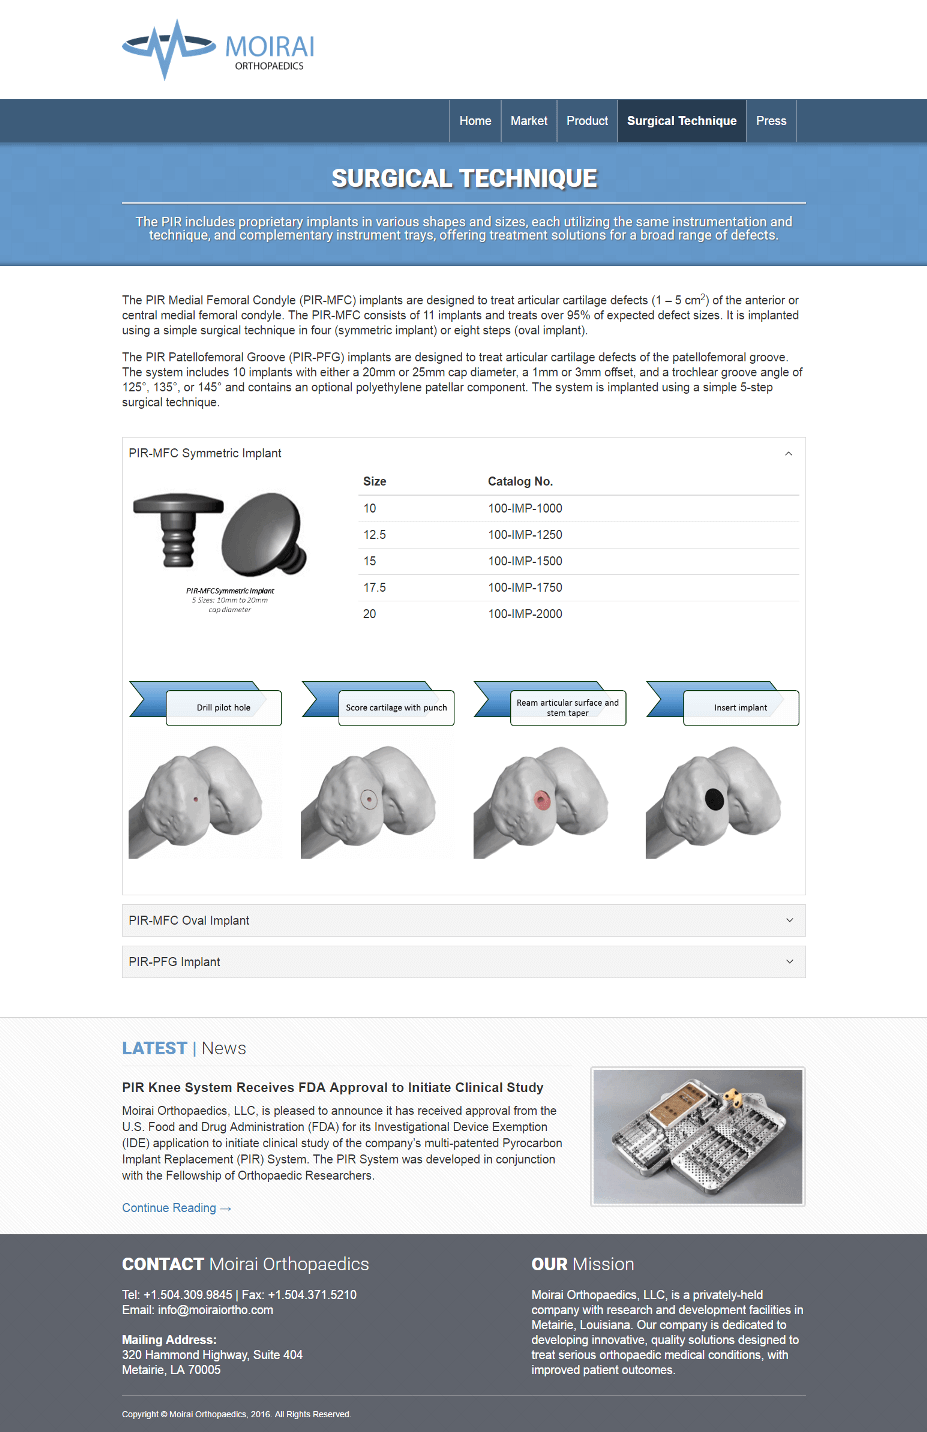 Surgical page for Moirai Orthopaedics